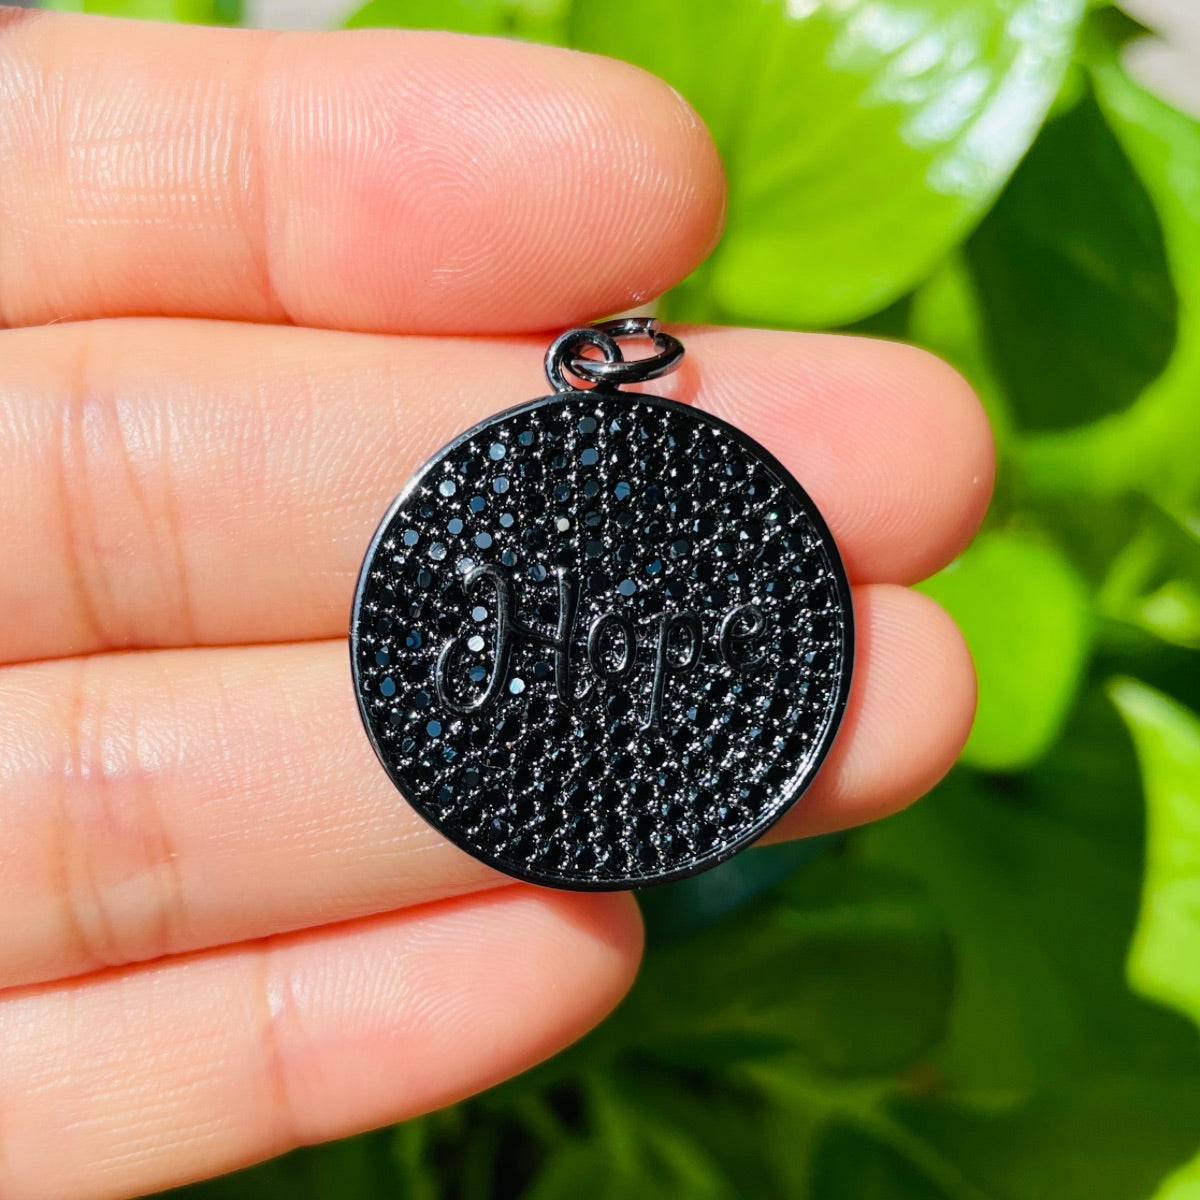 10pcs/lot 25mm CZ Pave Round Plate HOPE Quote Charms Black on Black CZ Paved Charms Christian Quotes Discs On Sale Charms Beads Beyond